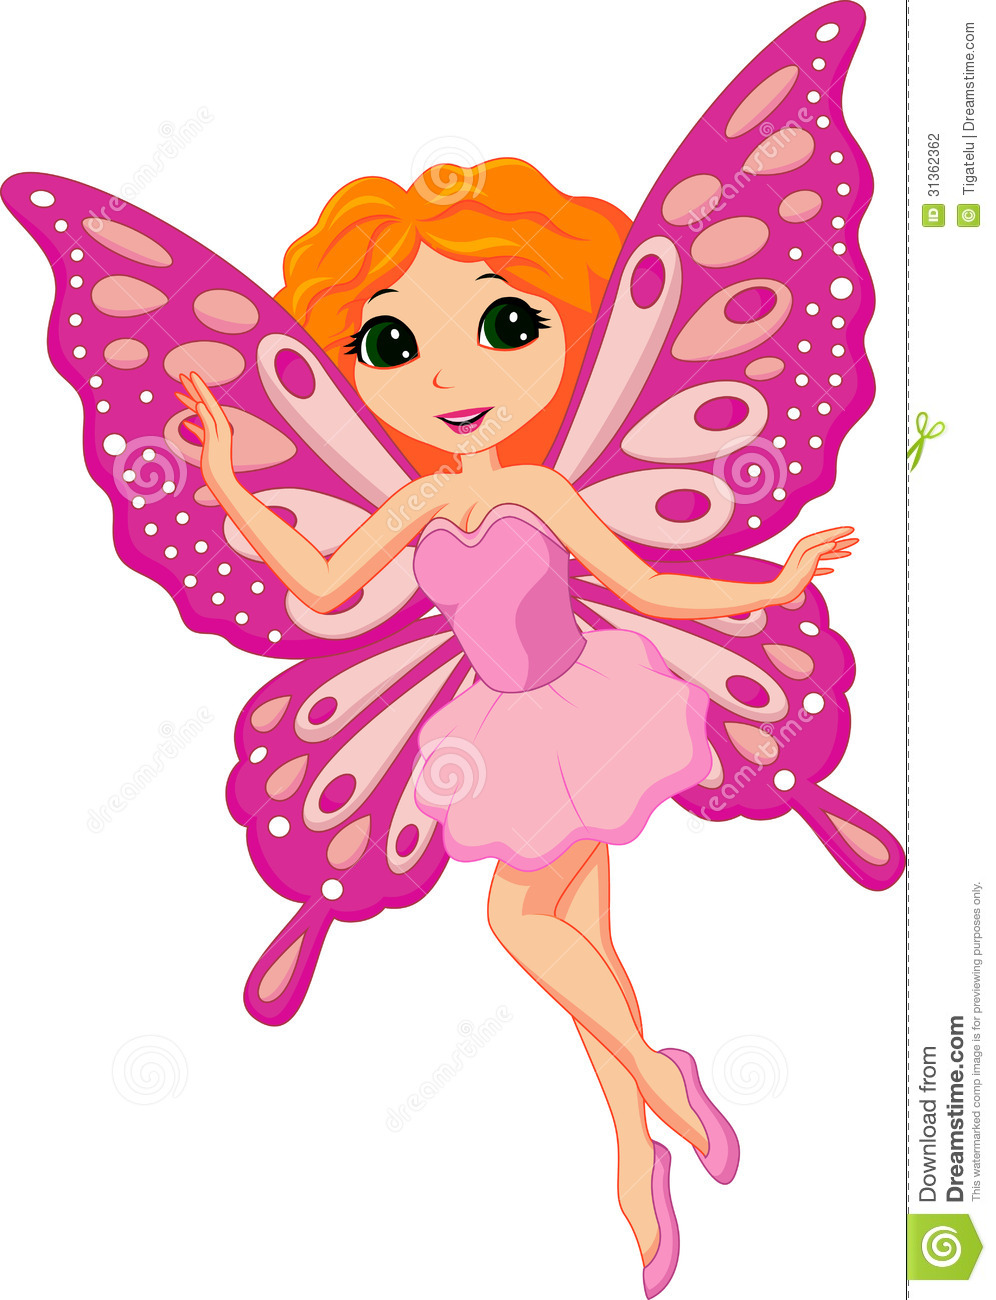 Cartoon Fairy Images   Hd Wallpapers Lovely